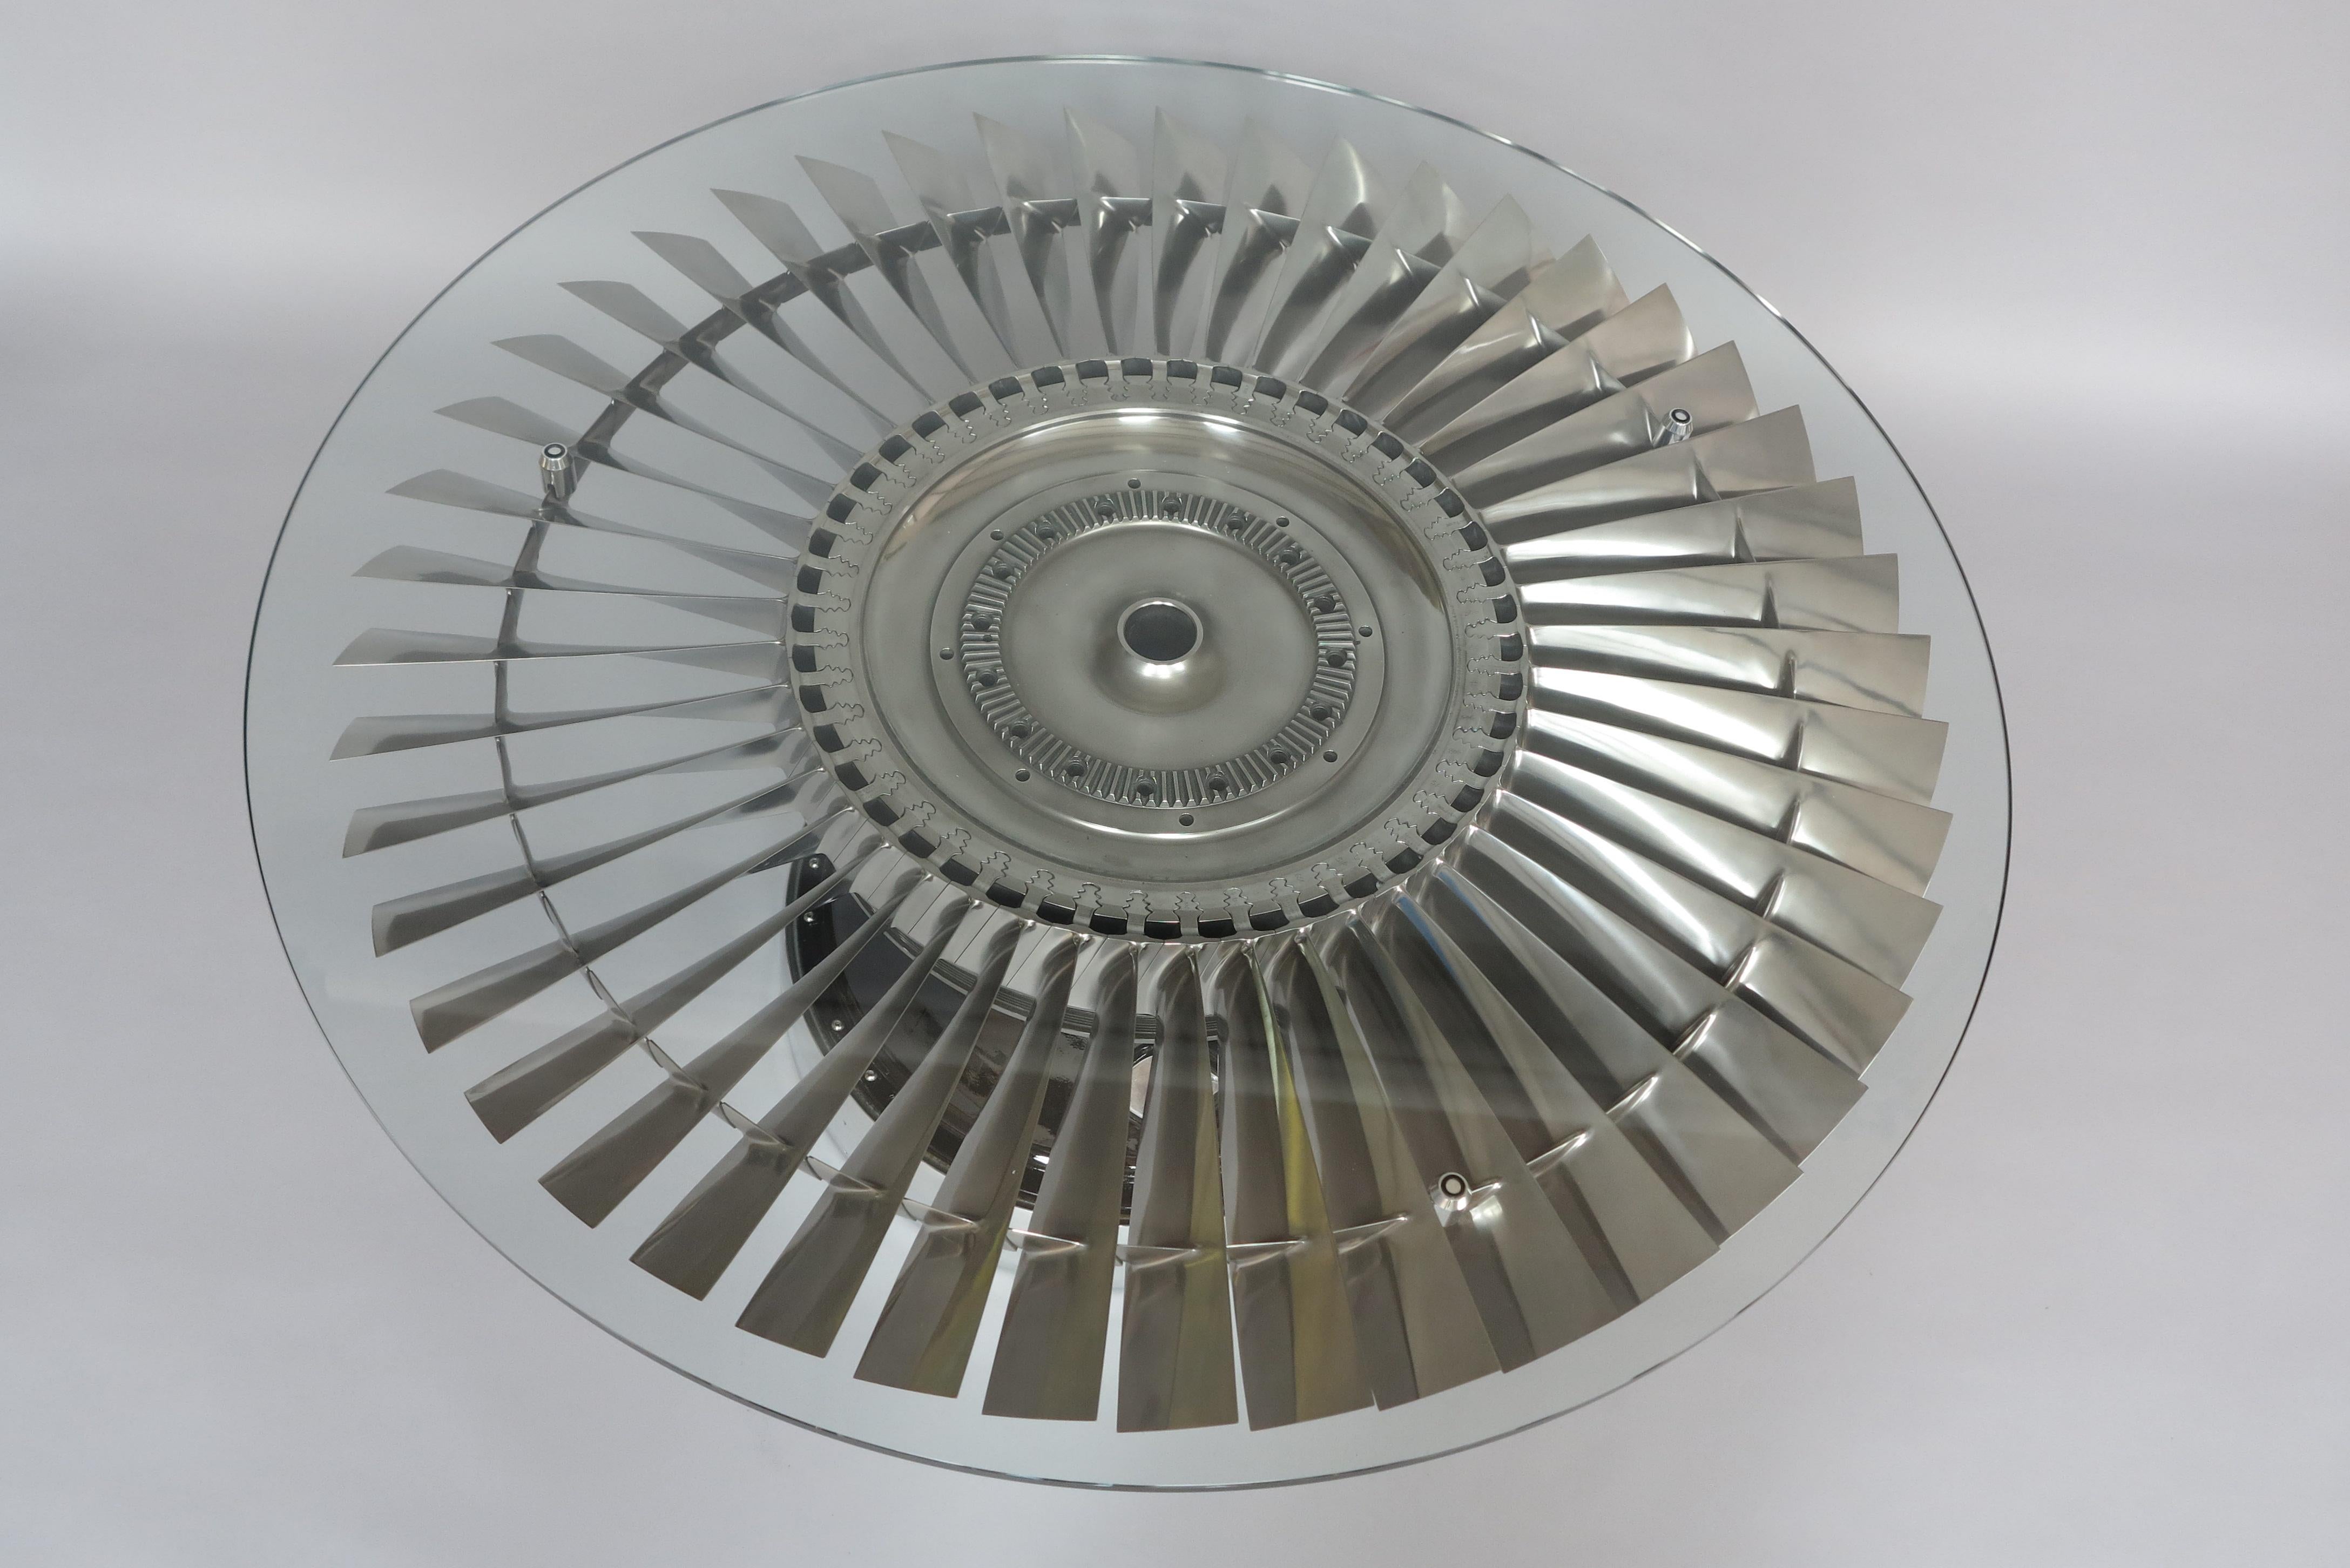 A simply stunning coffee table with 45 highly polished titanium blades, forming a complete LP2 (Low pressure 2) jet turbine from a Harrier Jump Jet. The base to which the turbine is fixed to is from within the actual jet engine and can be polished